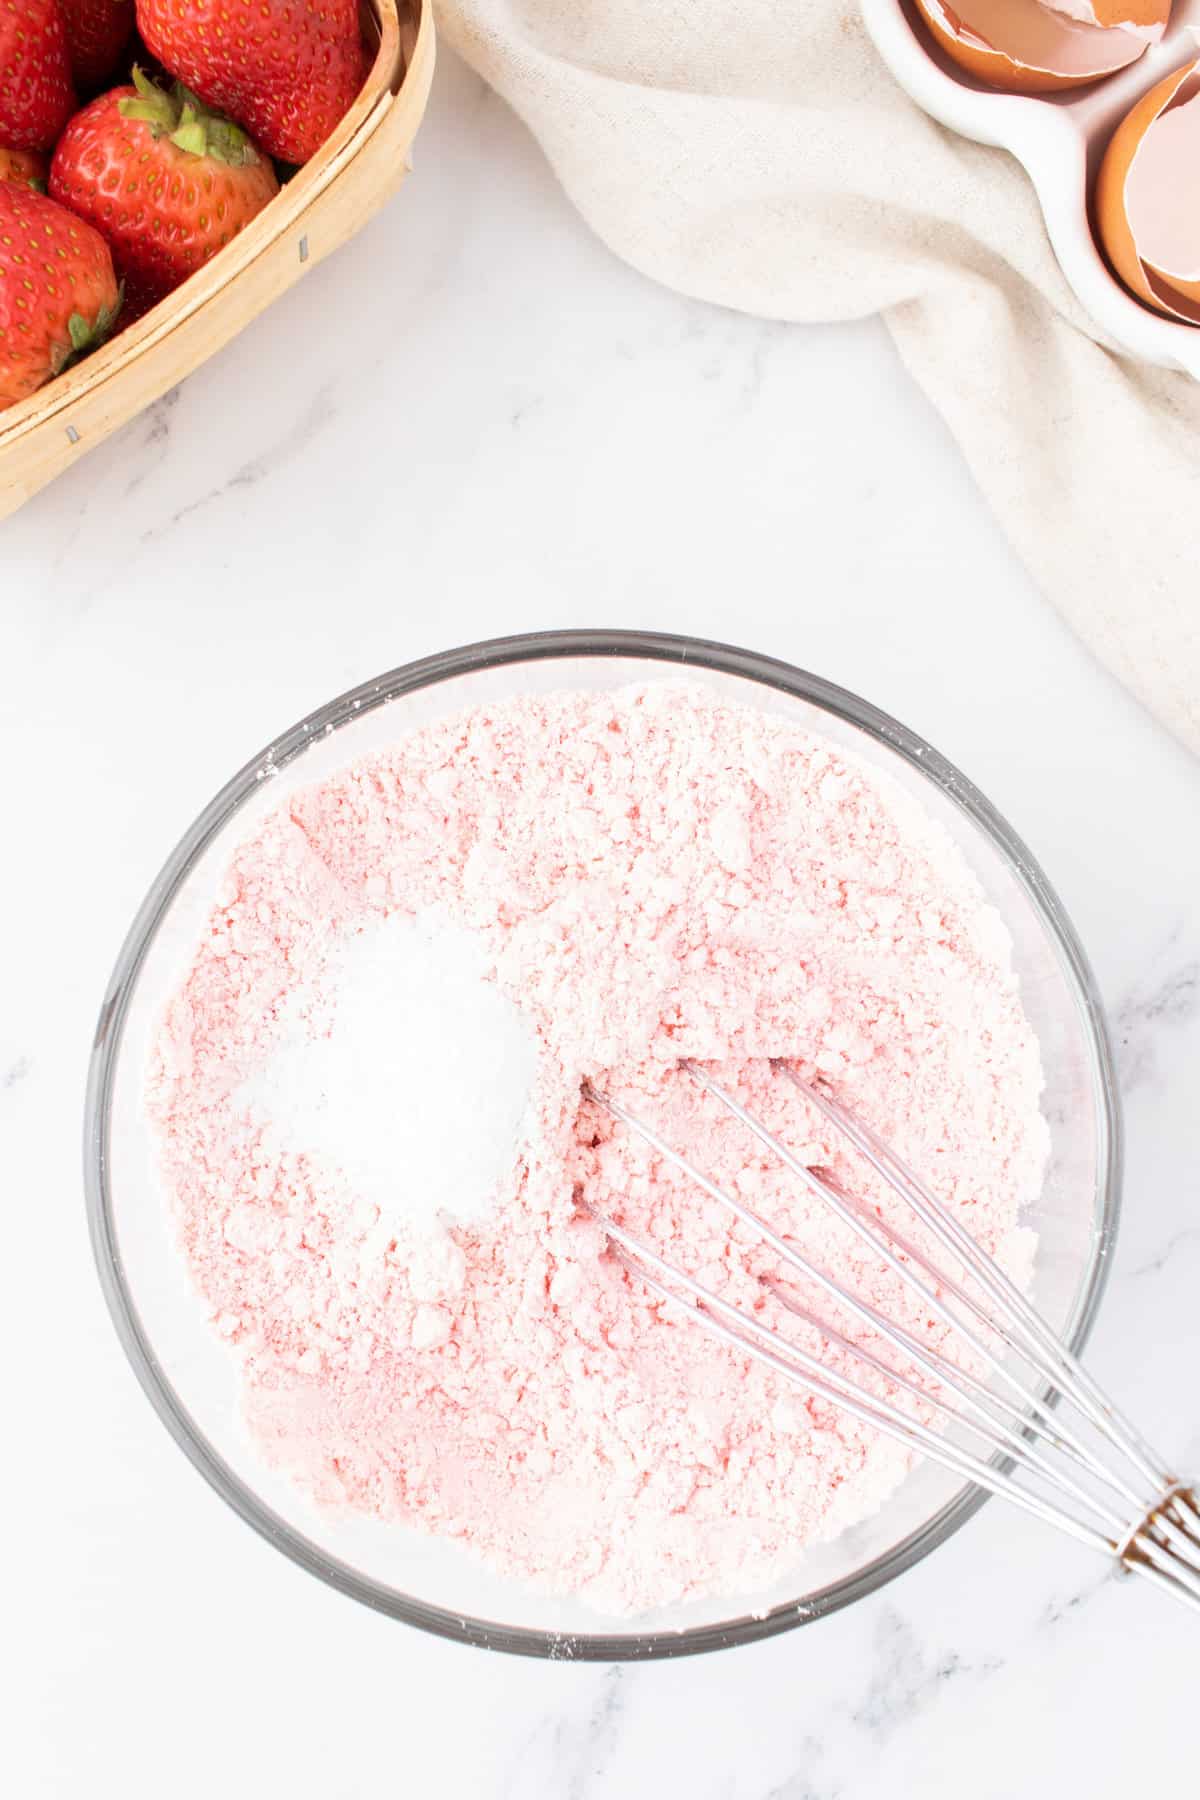 strawberry cake mix and baking powder in a mixing bowl